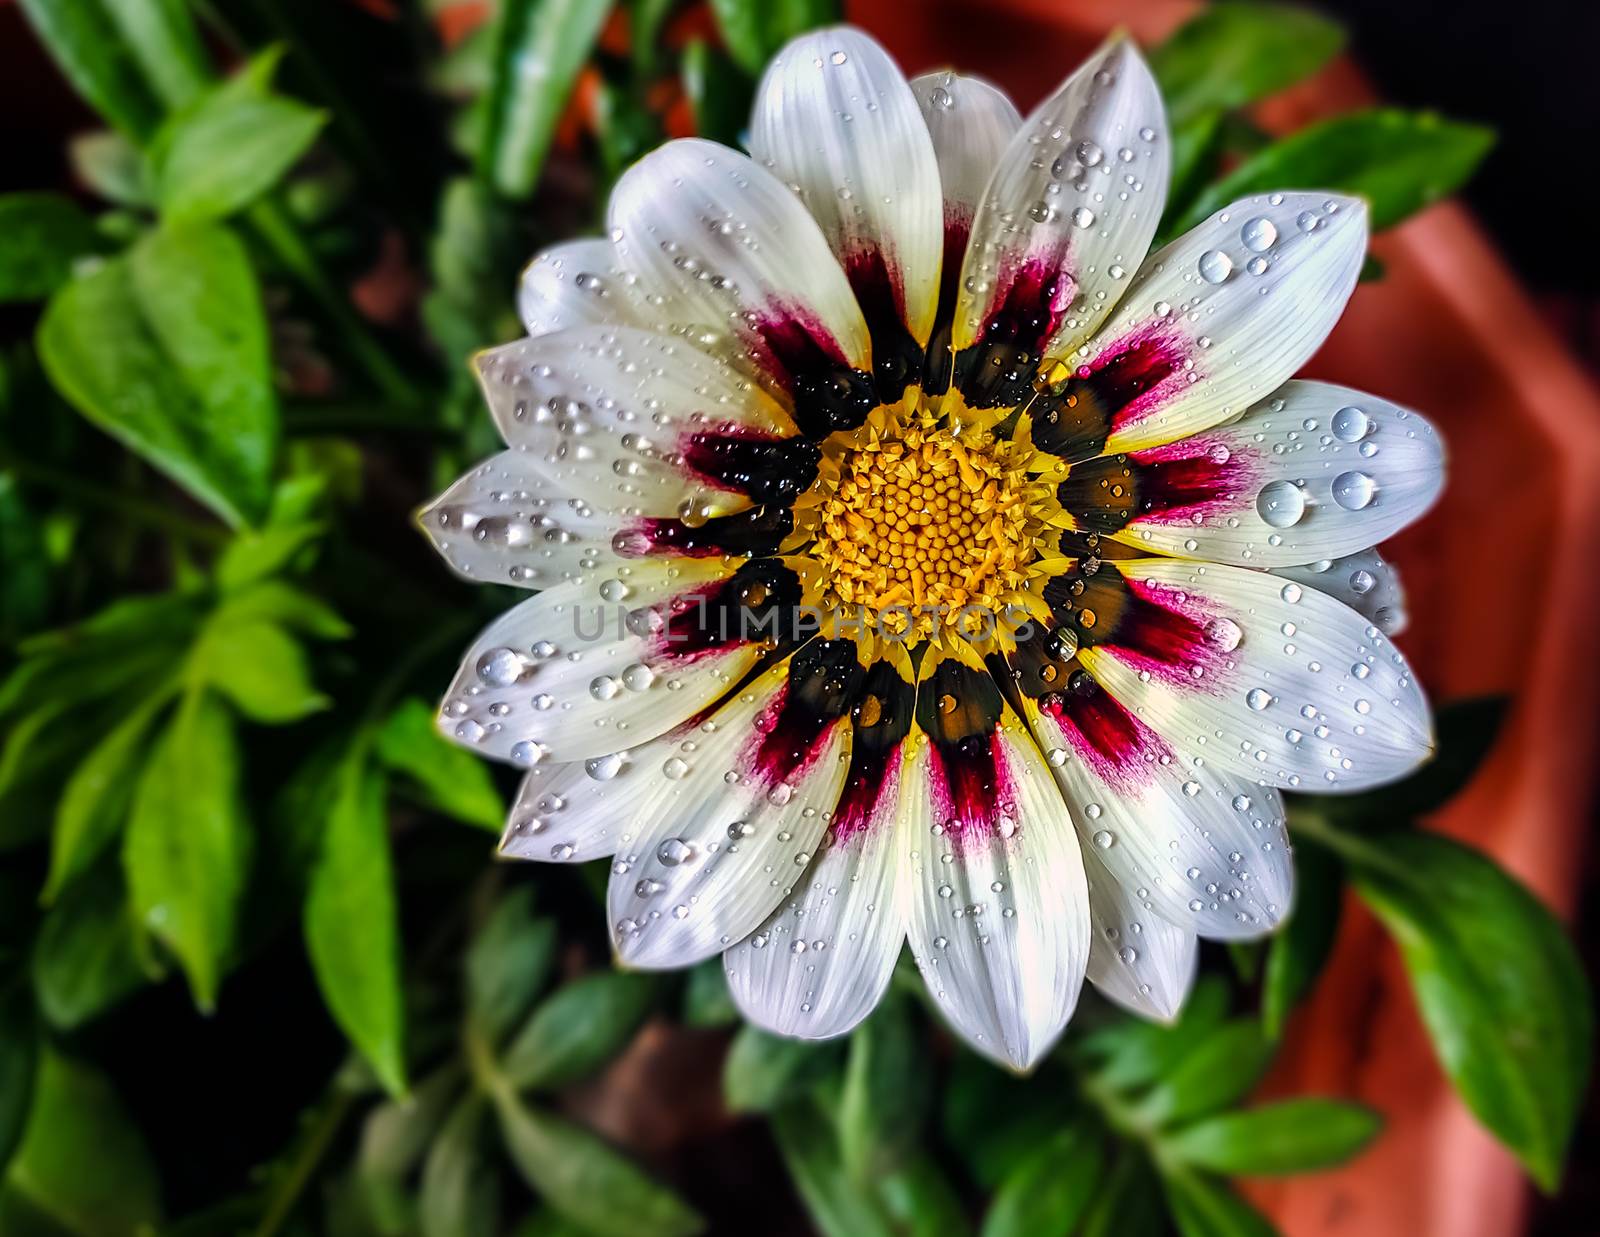 Isolated, close-up image of white & pink petals of Gazania flower with yellow center and water droplets..